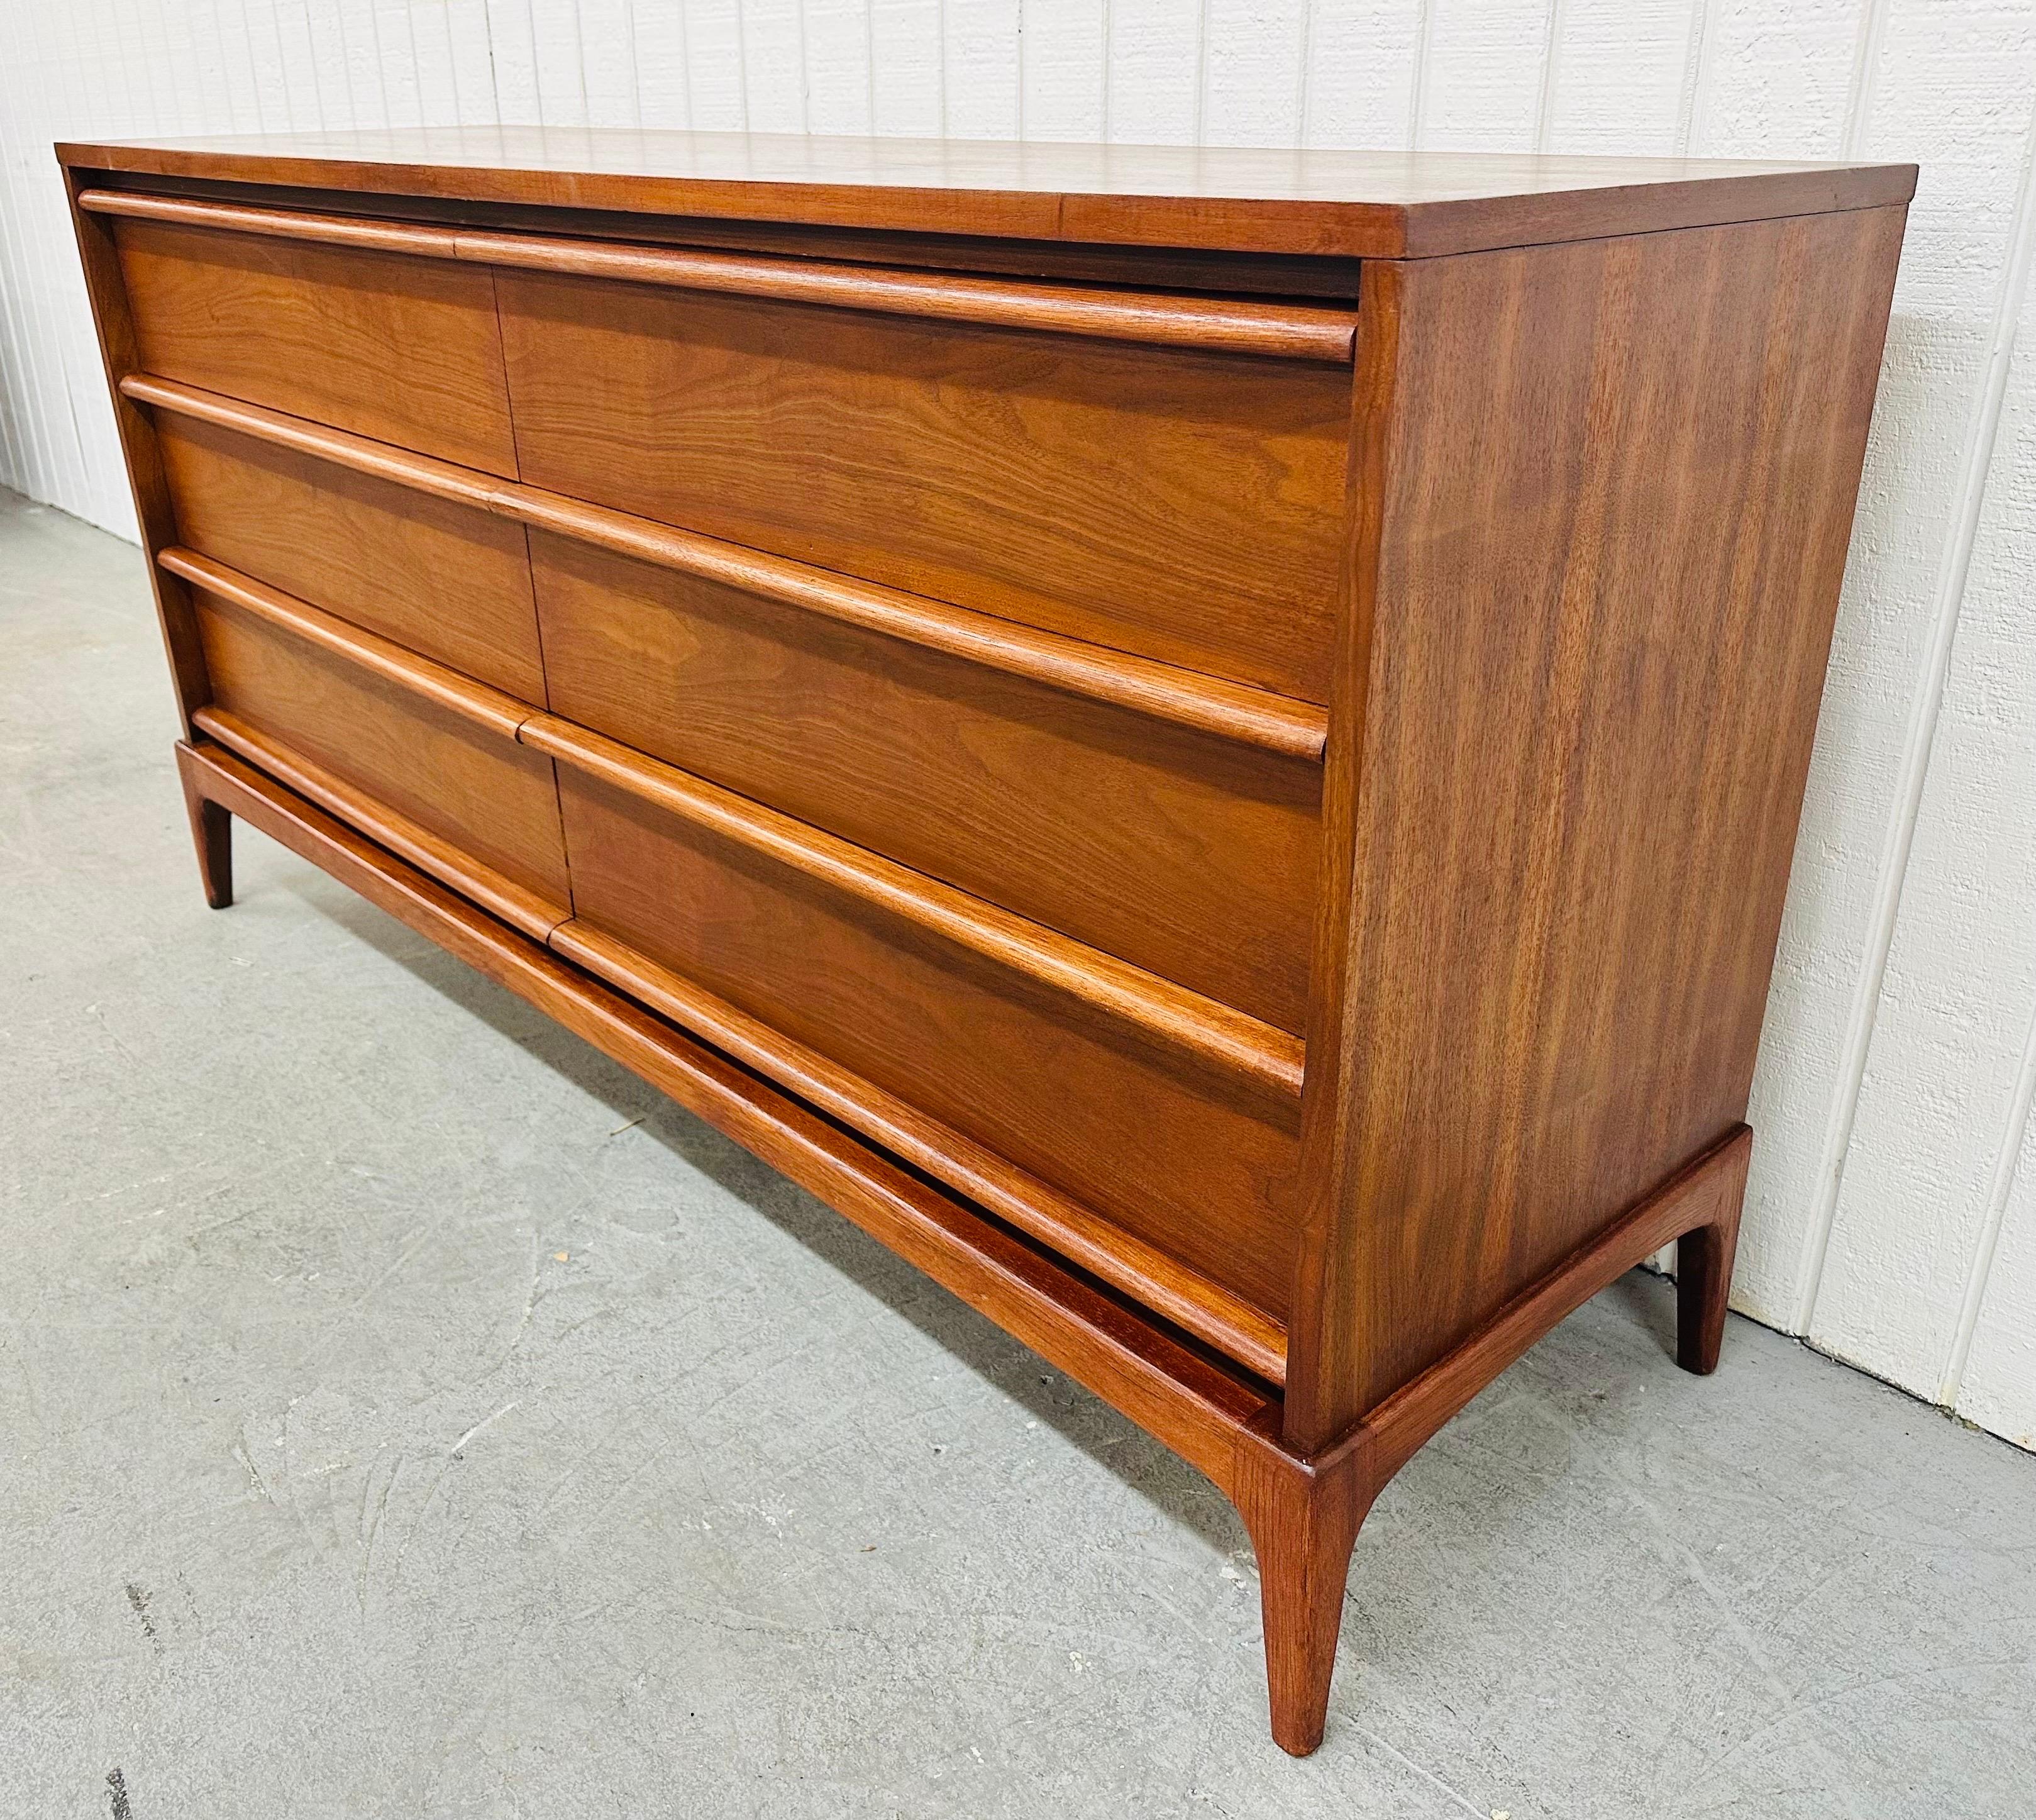 This listing is for a Mid-Century Modern Lane Rhythm Walnut Dresser. Featuring a straight line design, six equally sized drawers for storage, wooden pulls across the top of each drawer, modern legs, and a beautiful walnut finish. This is an